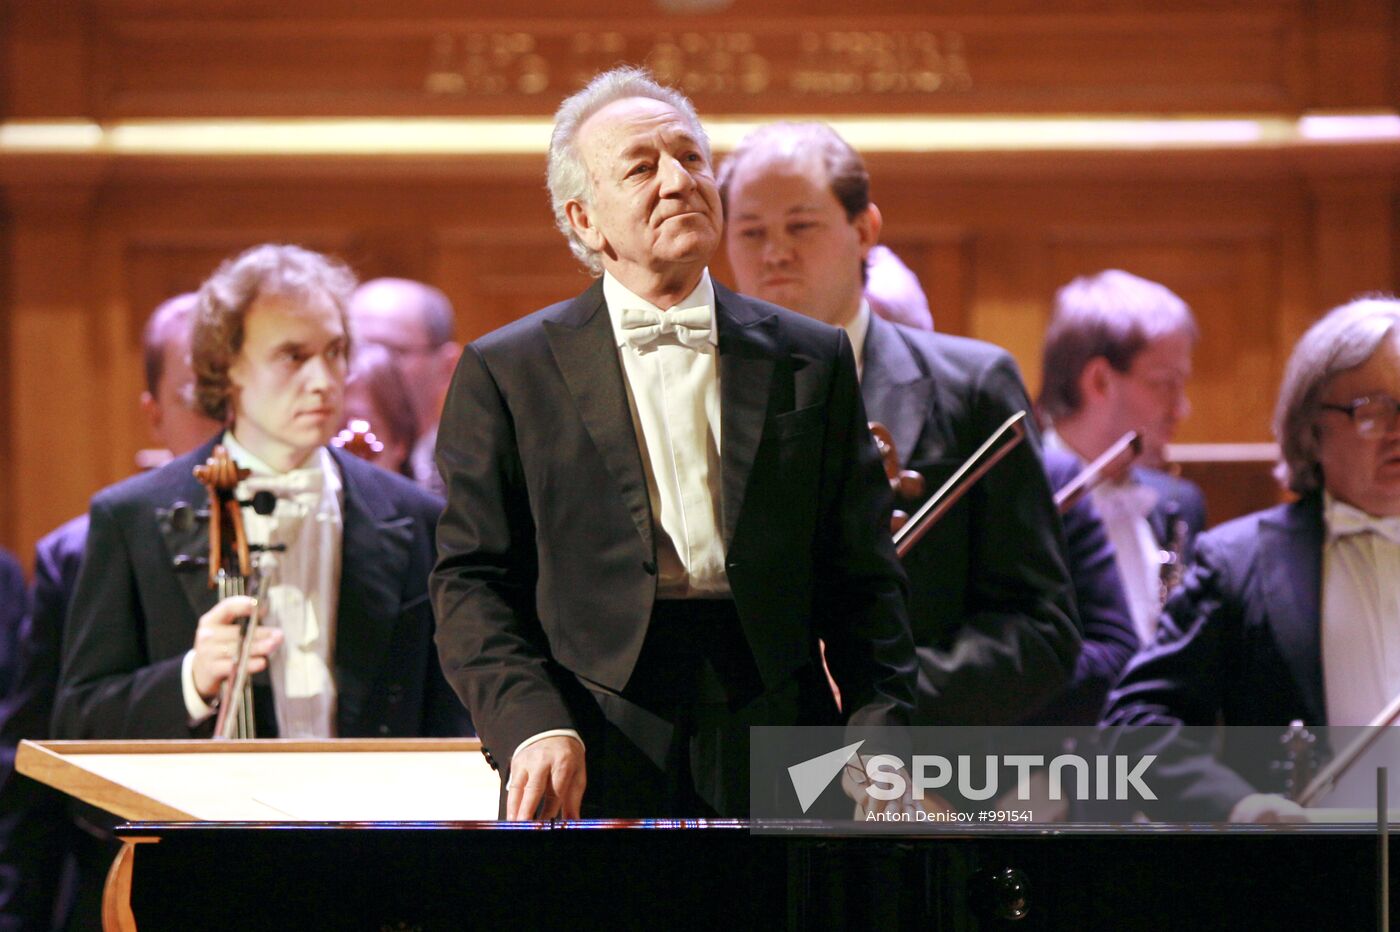 Charity orchestral concert conducted by Yuri Temirkanov